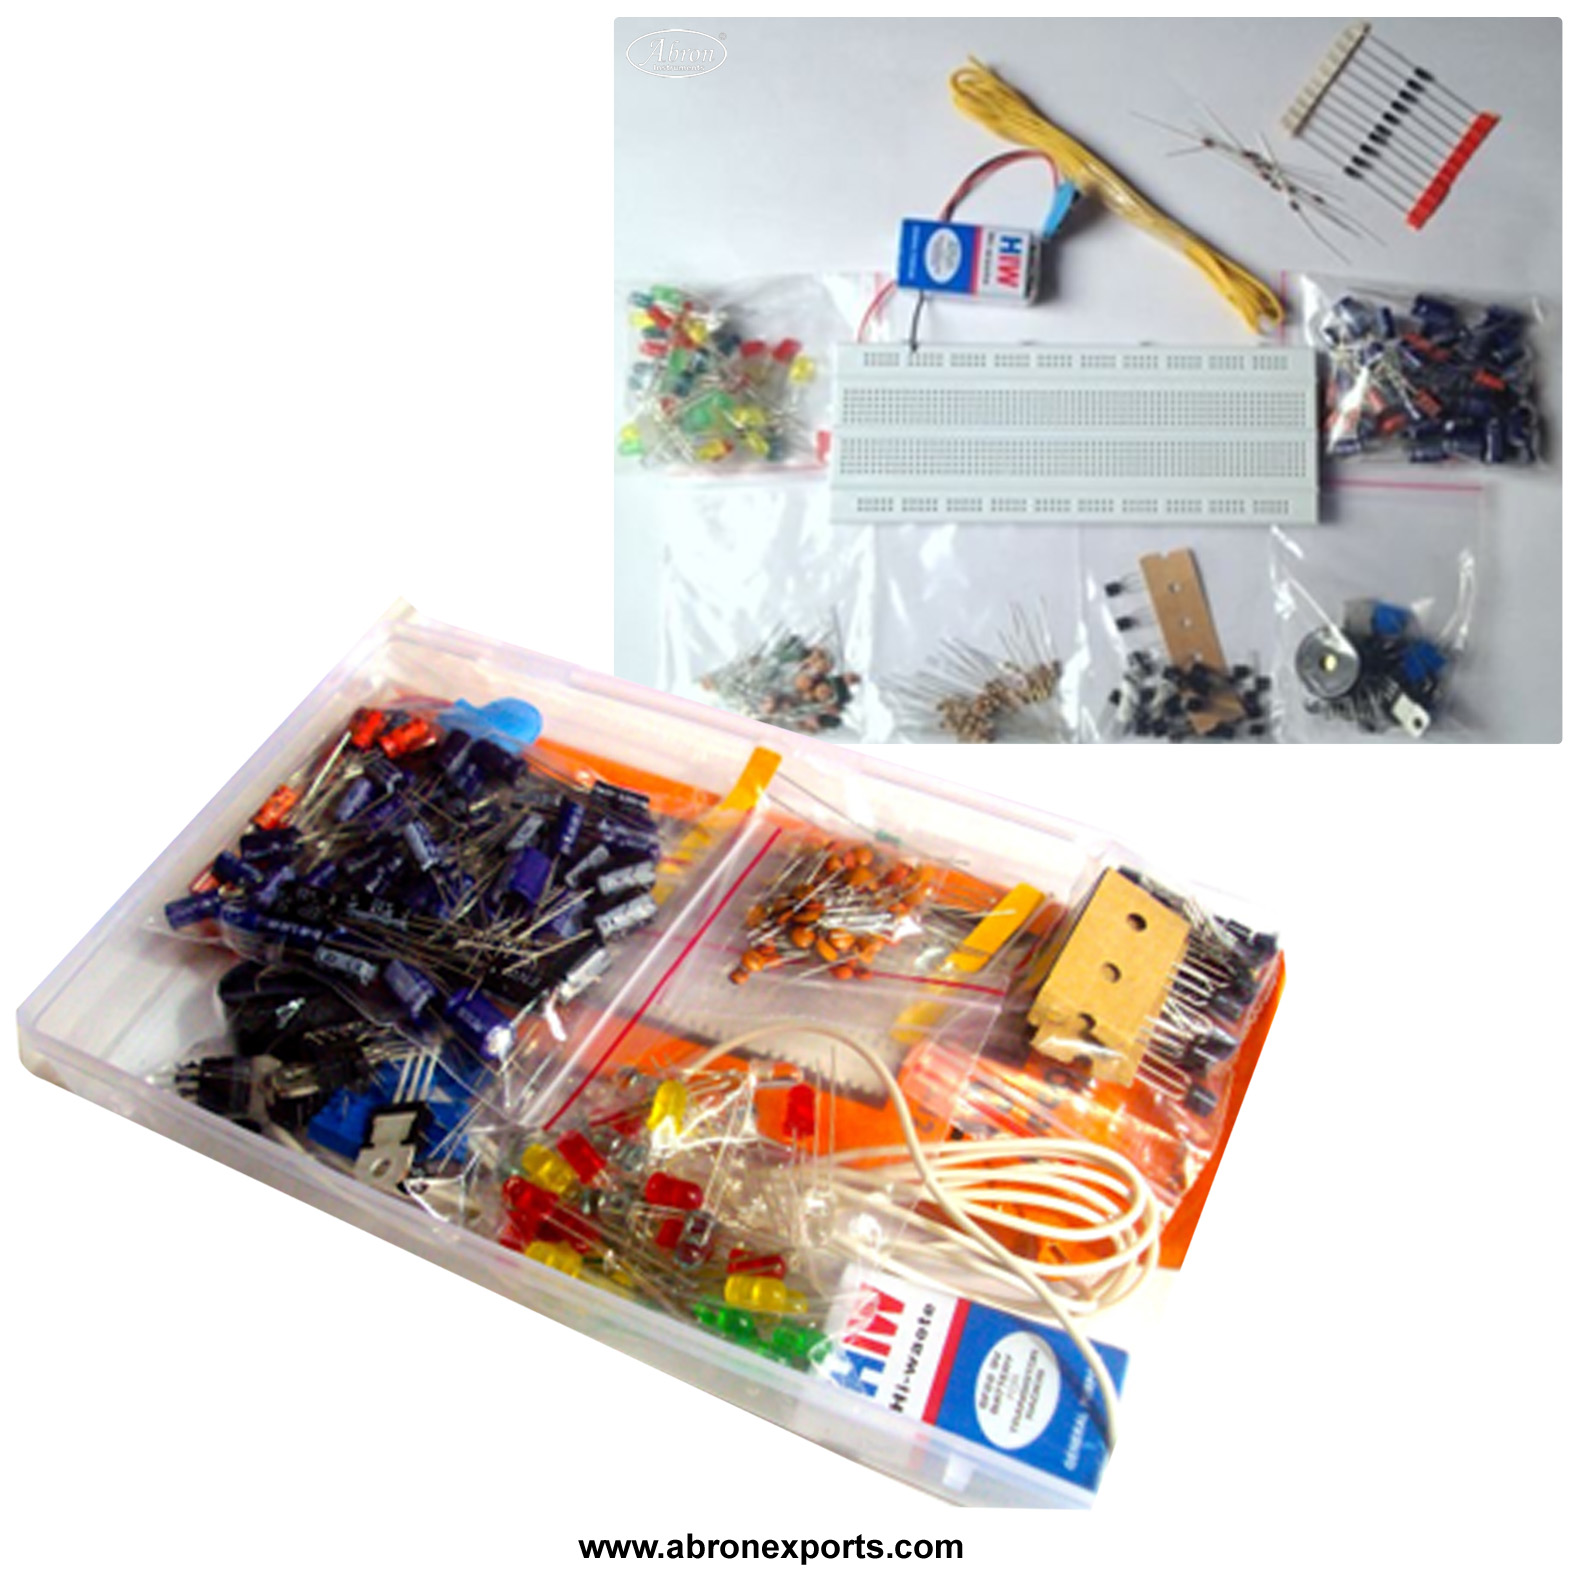 Components kit project bread board capacitors resistors led switch abron AE-1224-K5  